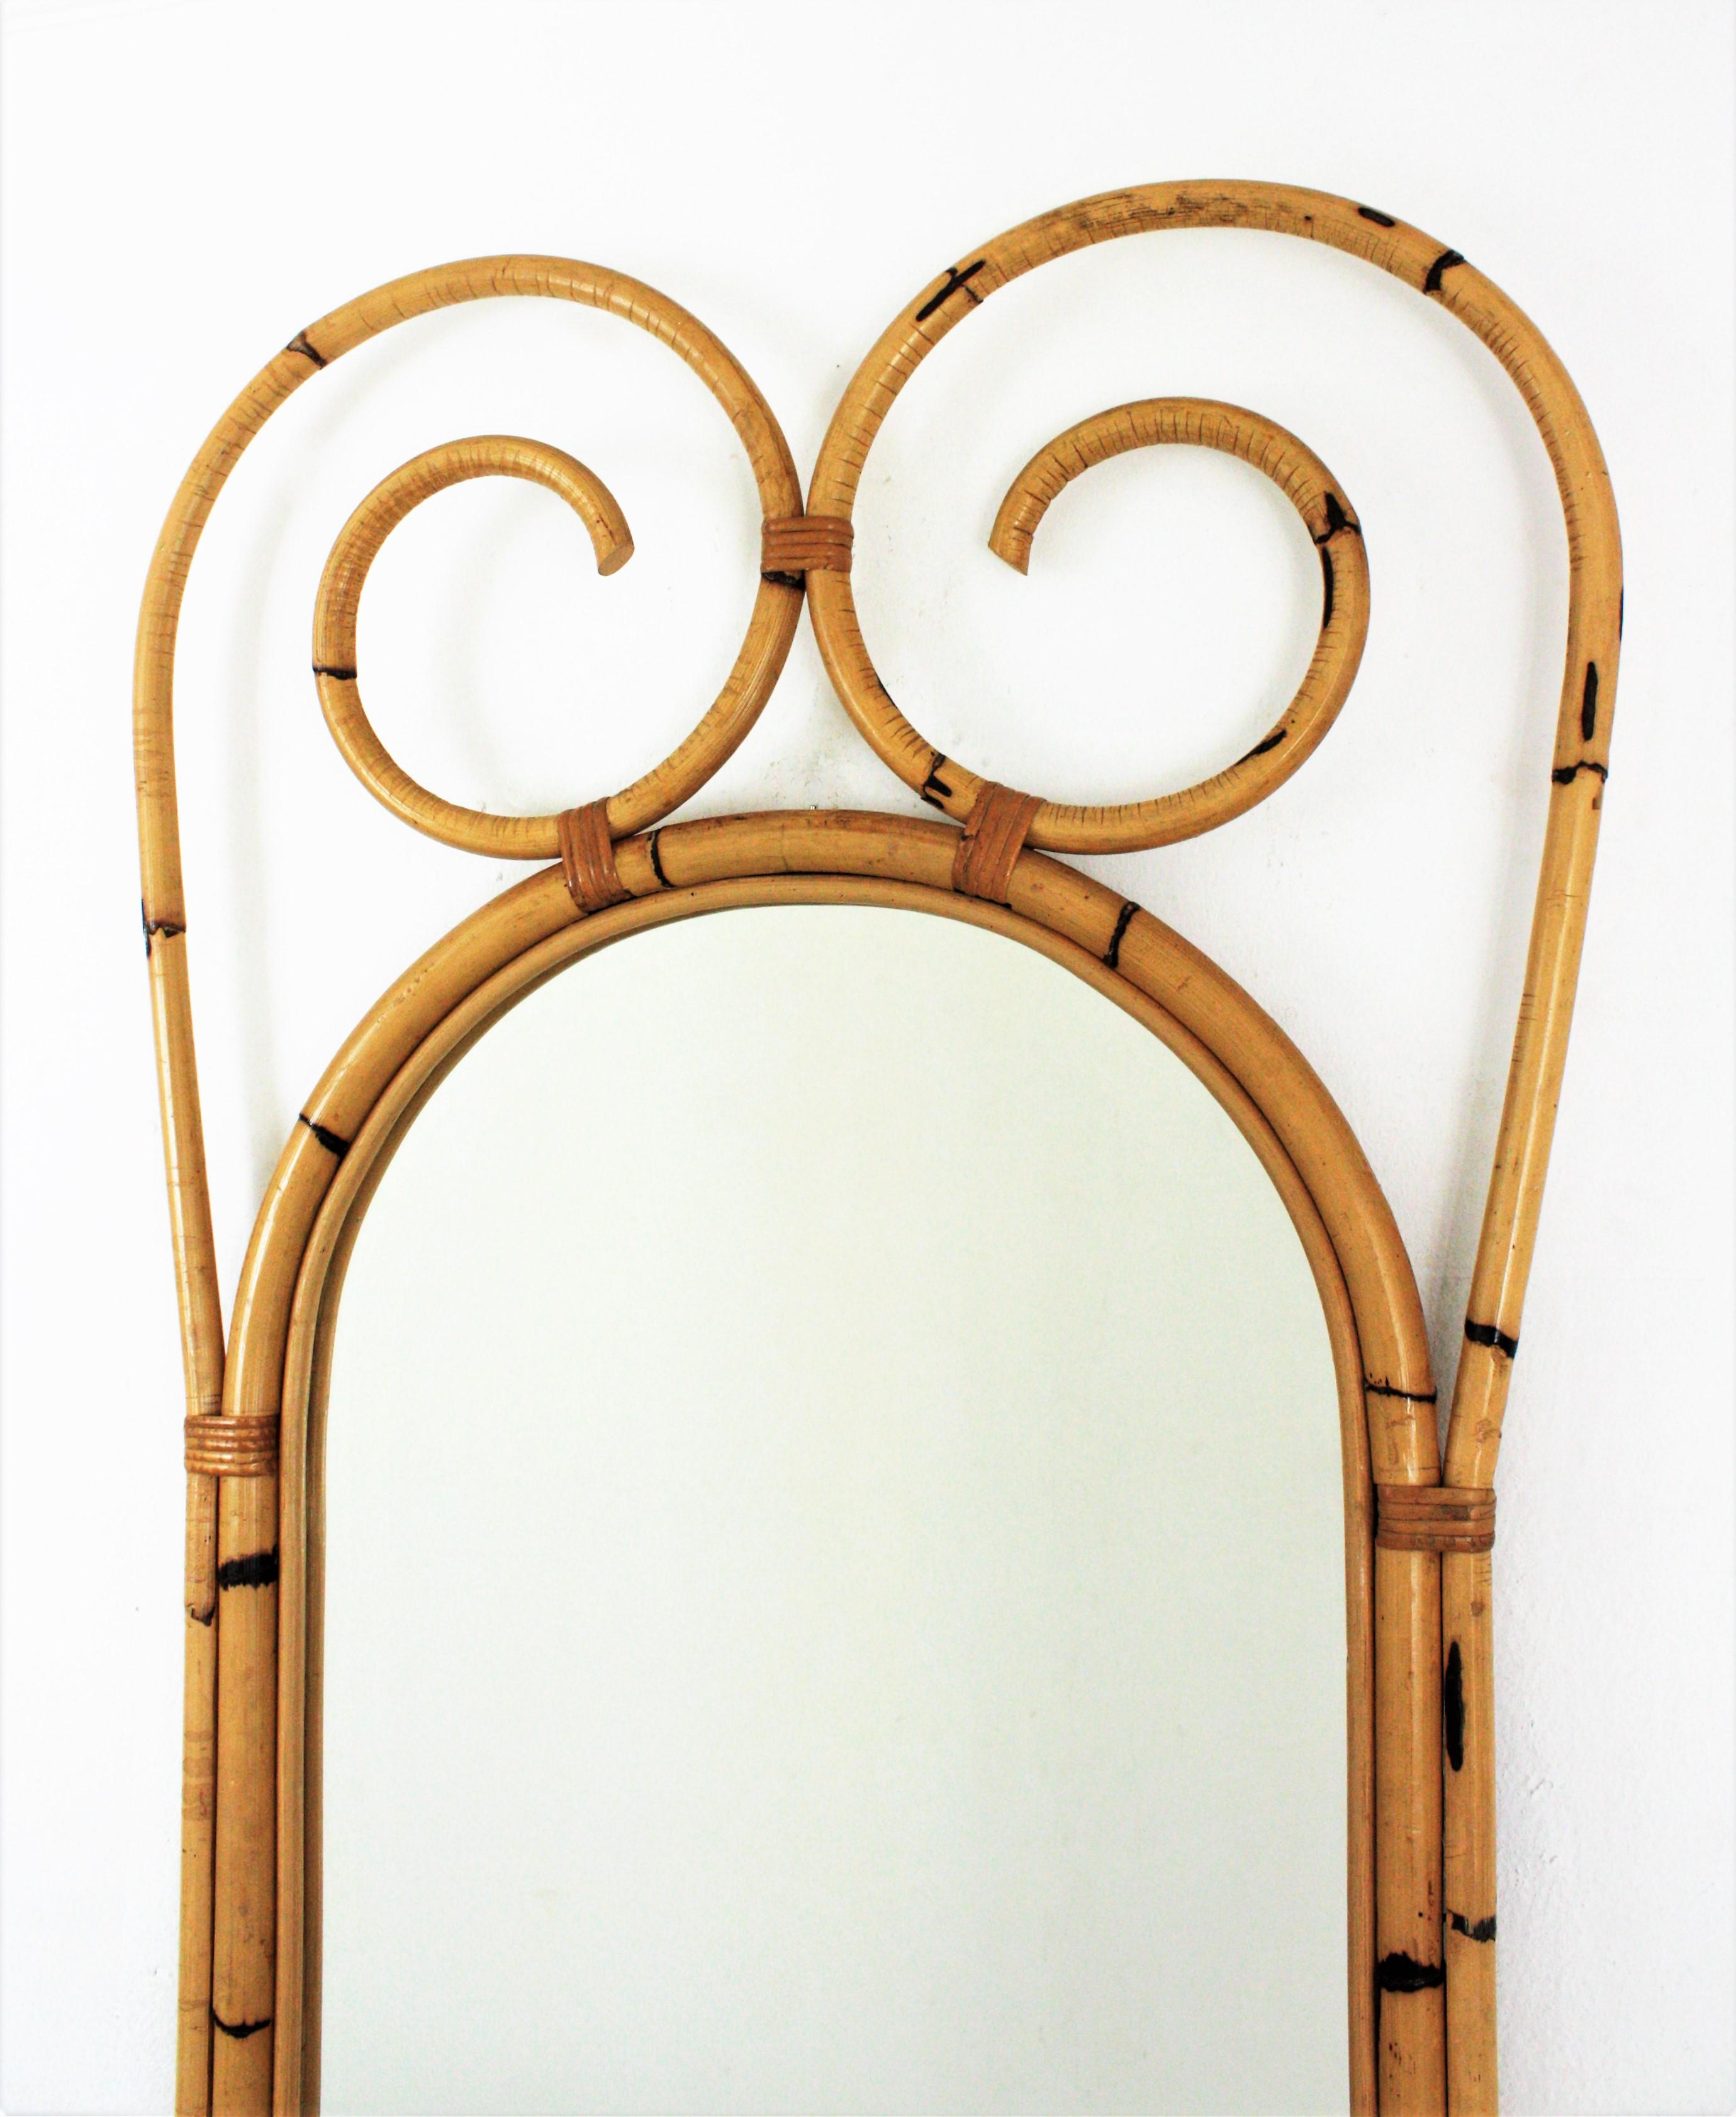 Hand-Crafted Large Rattan Bamboo Wall Mirror with Scroll Top, Italian Designer, 1950s For Sale